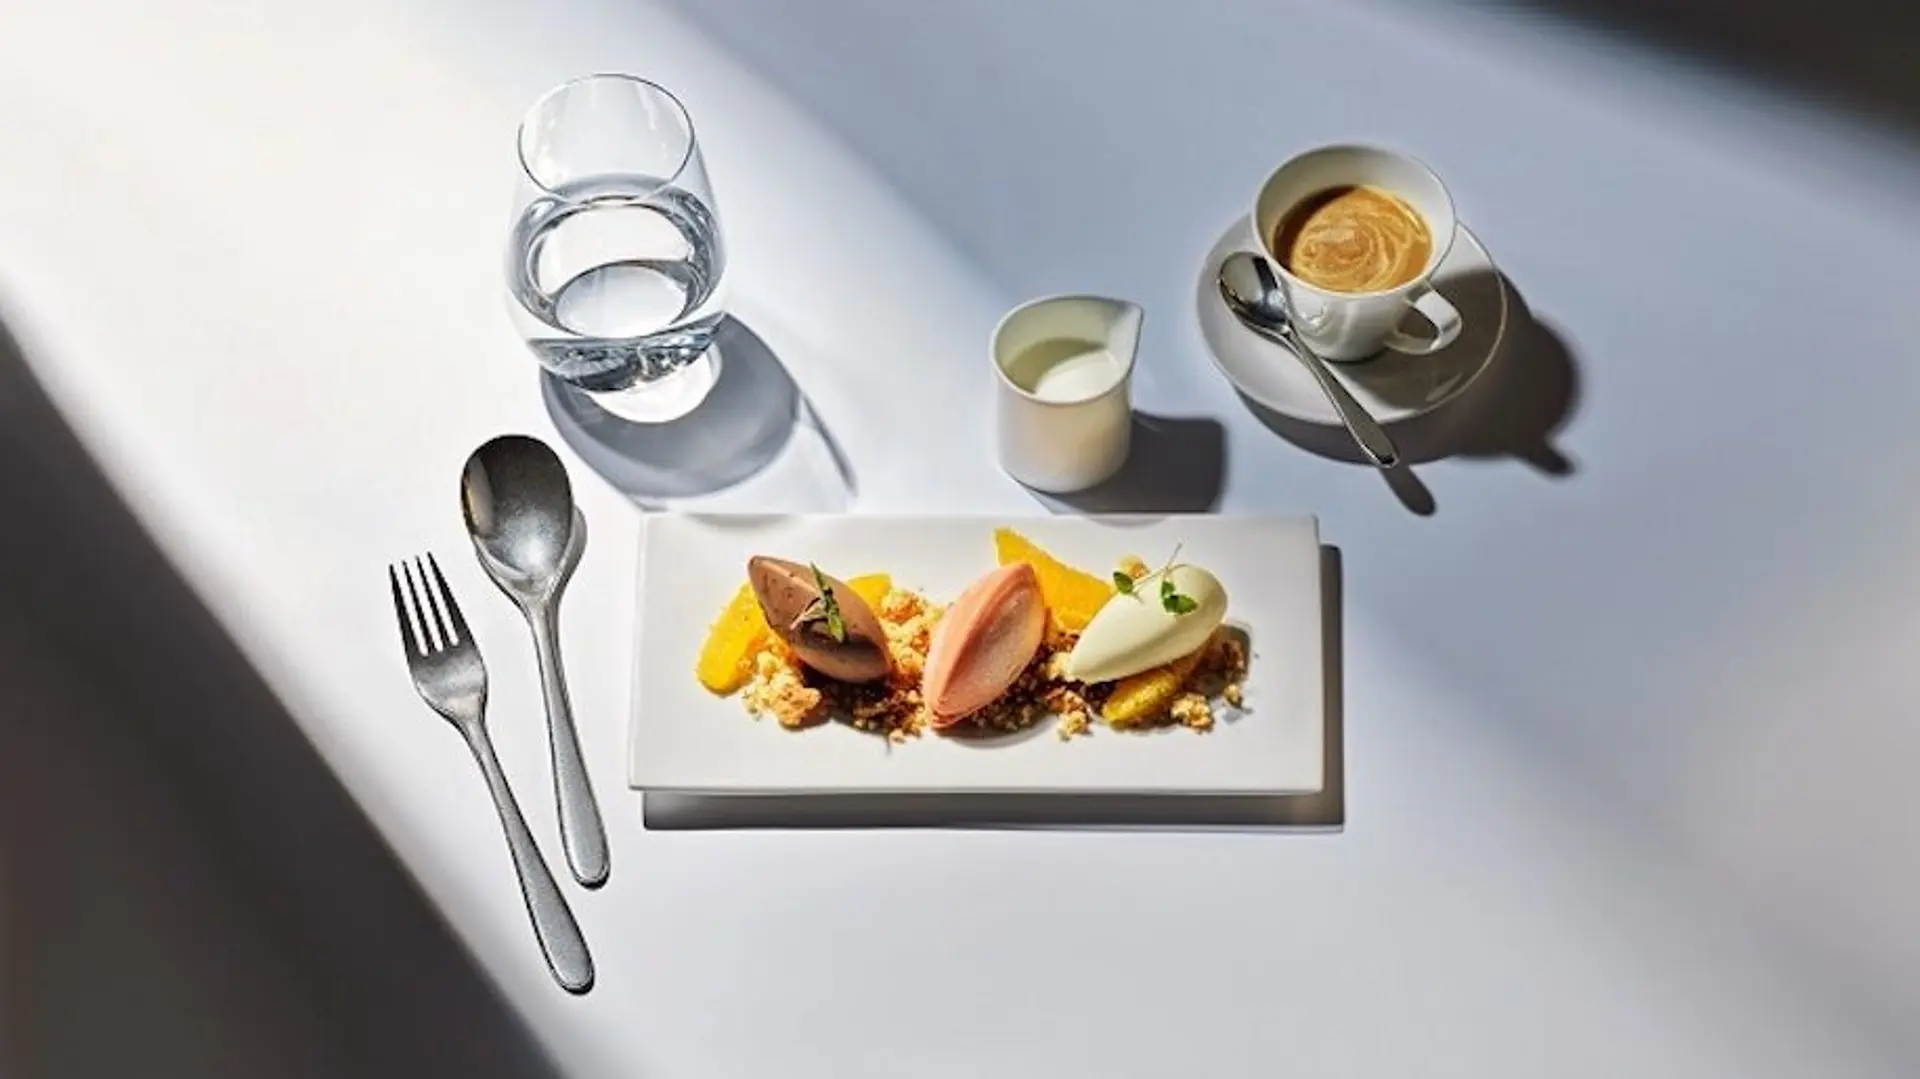 Airlines News - SWISS launches a new flight menu in collaboration with a Michelin-starred chef